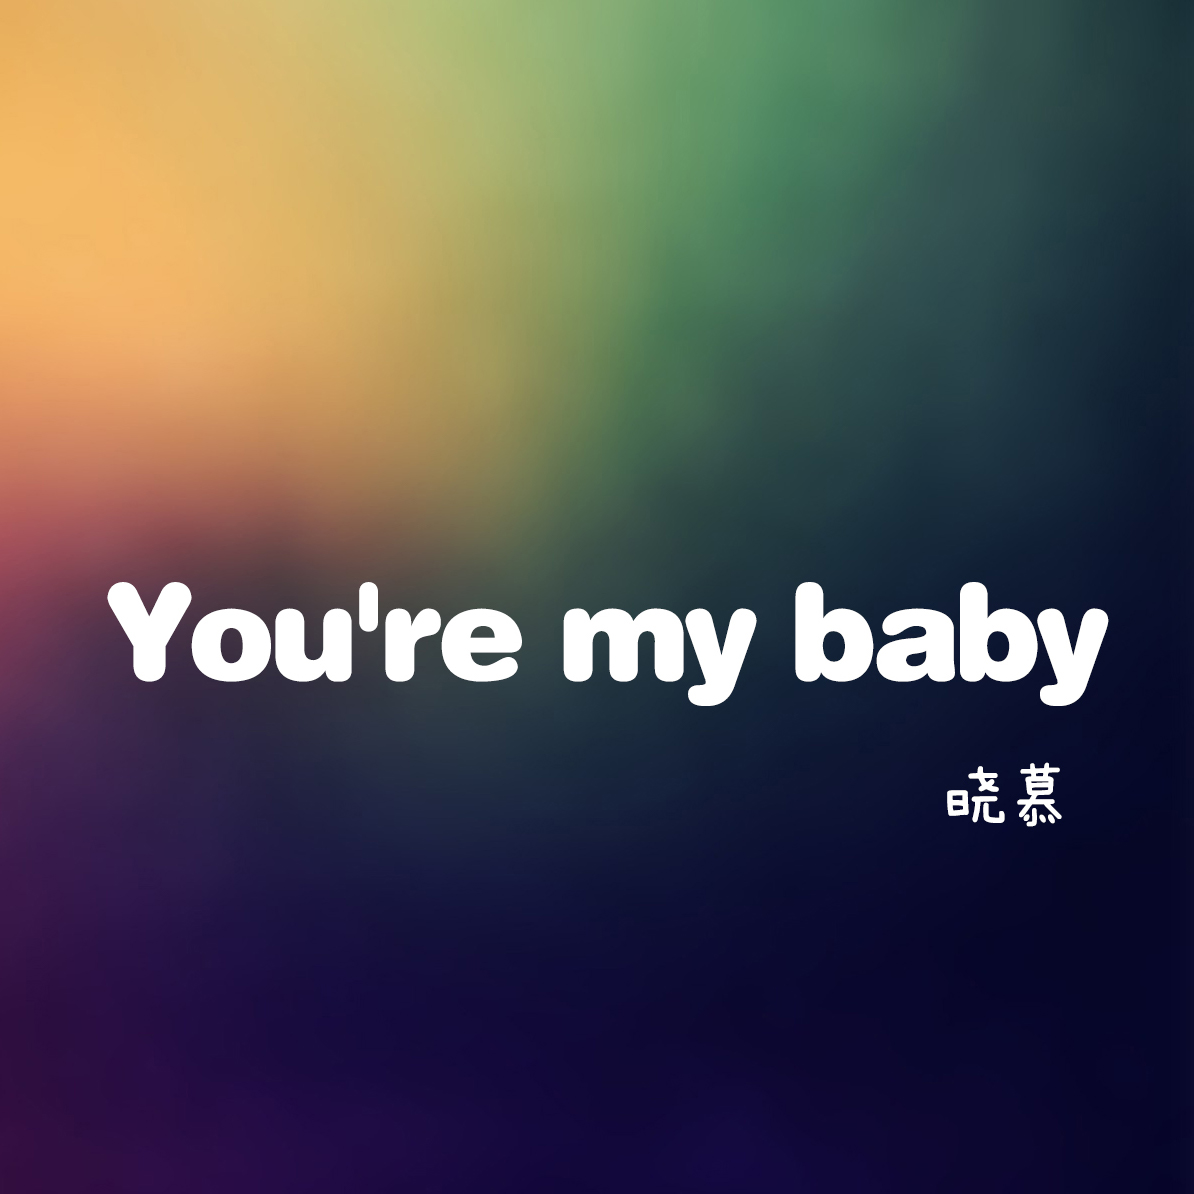 You're my baby